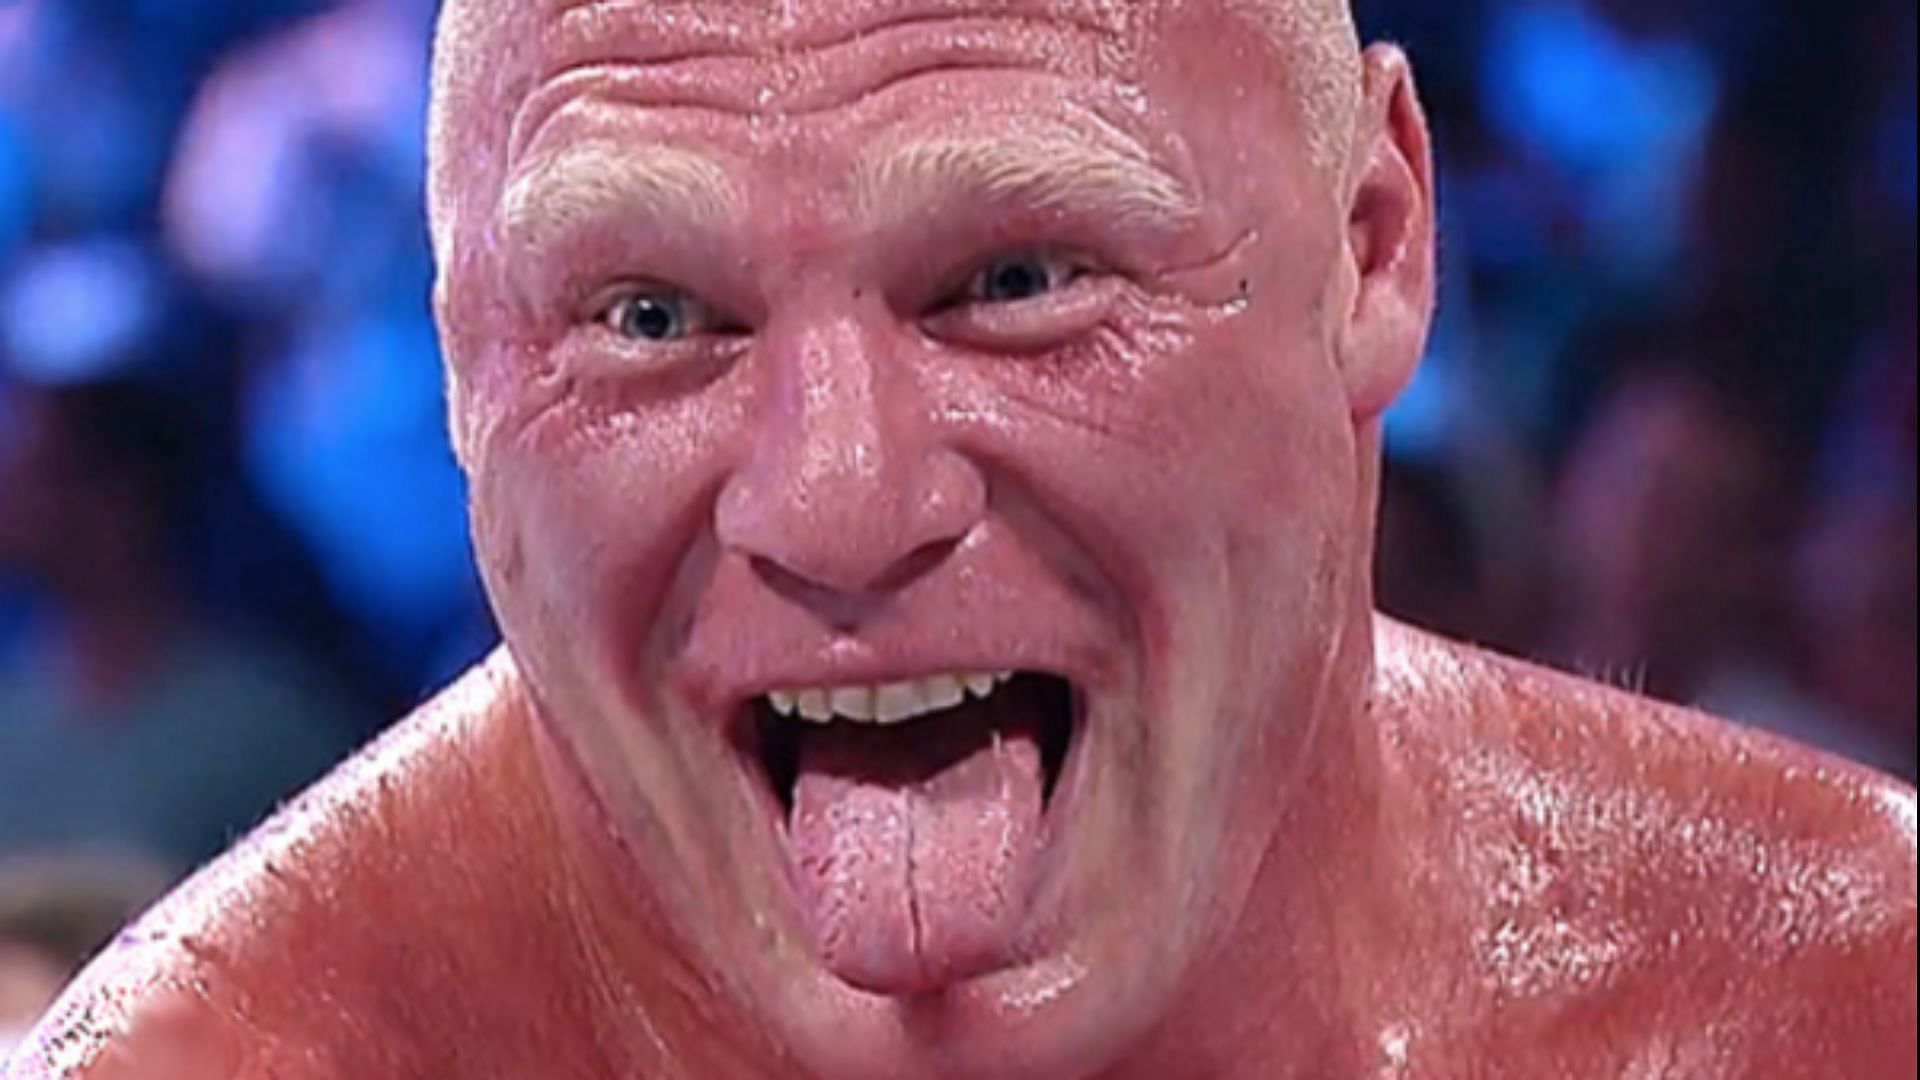 Brock Lesnar is one of the most terrifying WWE Superstars on the roster.